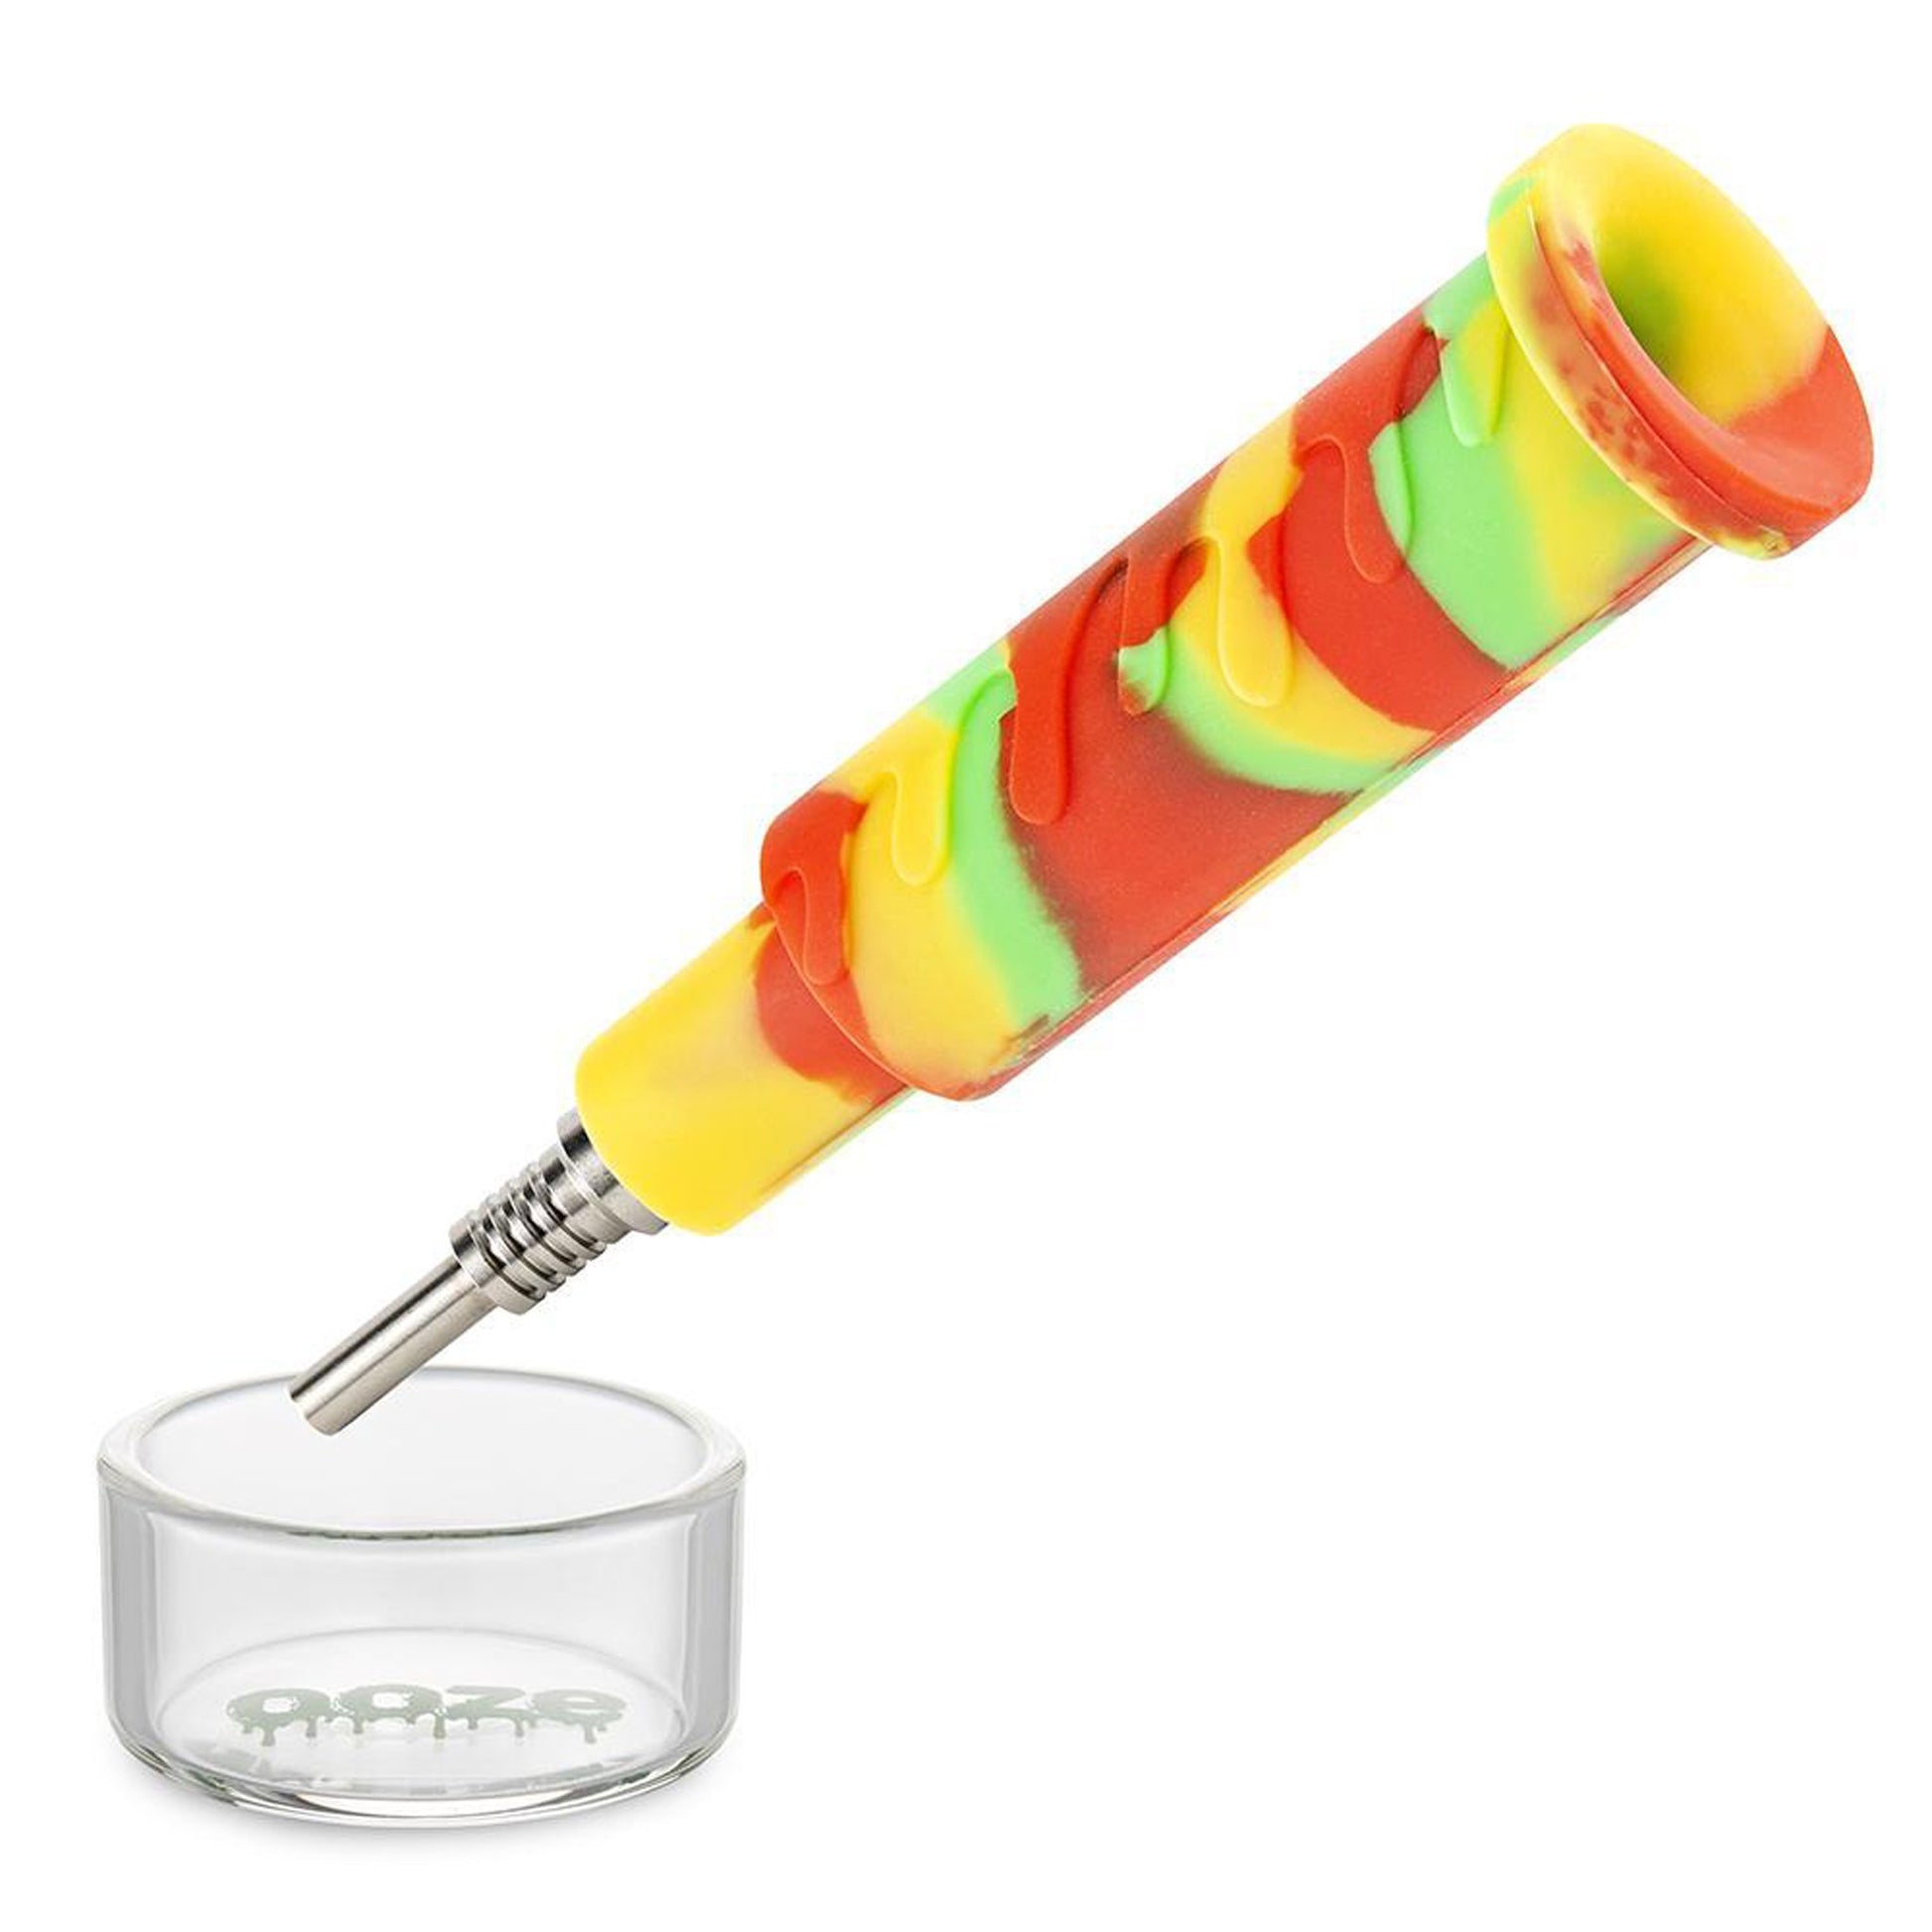 Ooze Cranium 4-in-1 Silicone Water Pipe n Nectar Collector - 8.5in